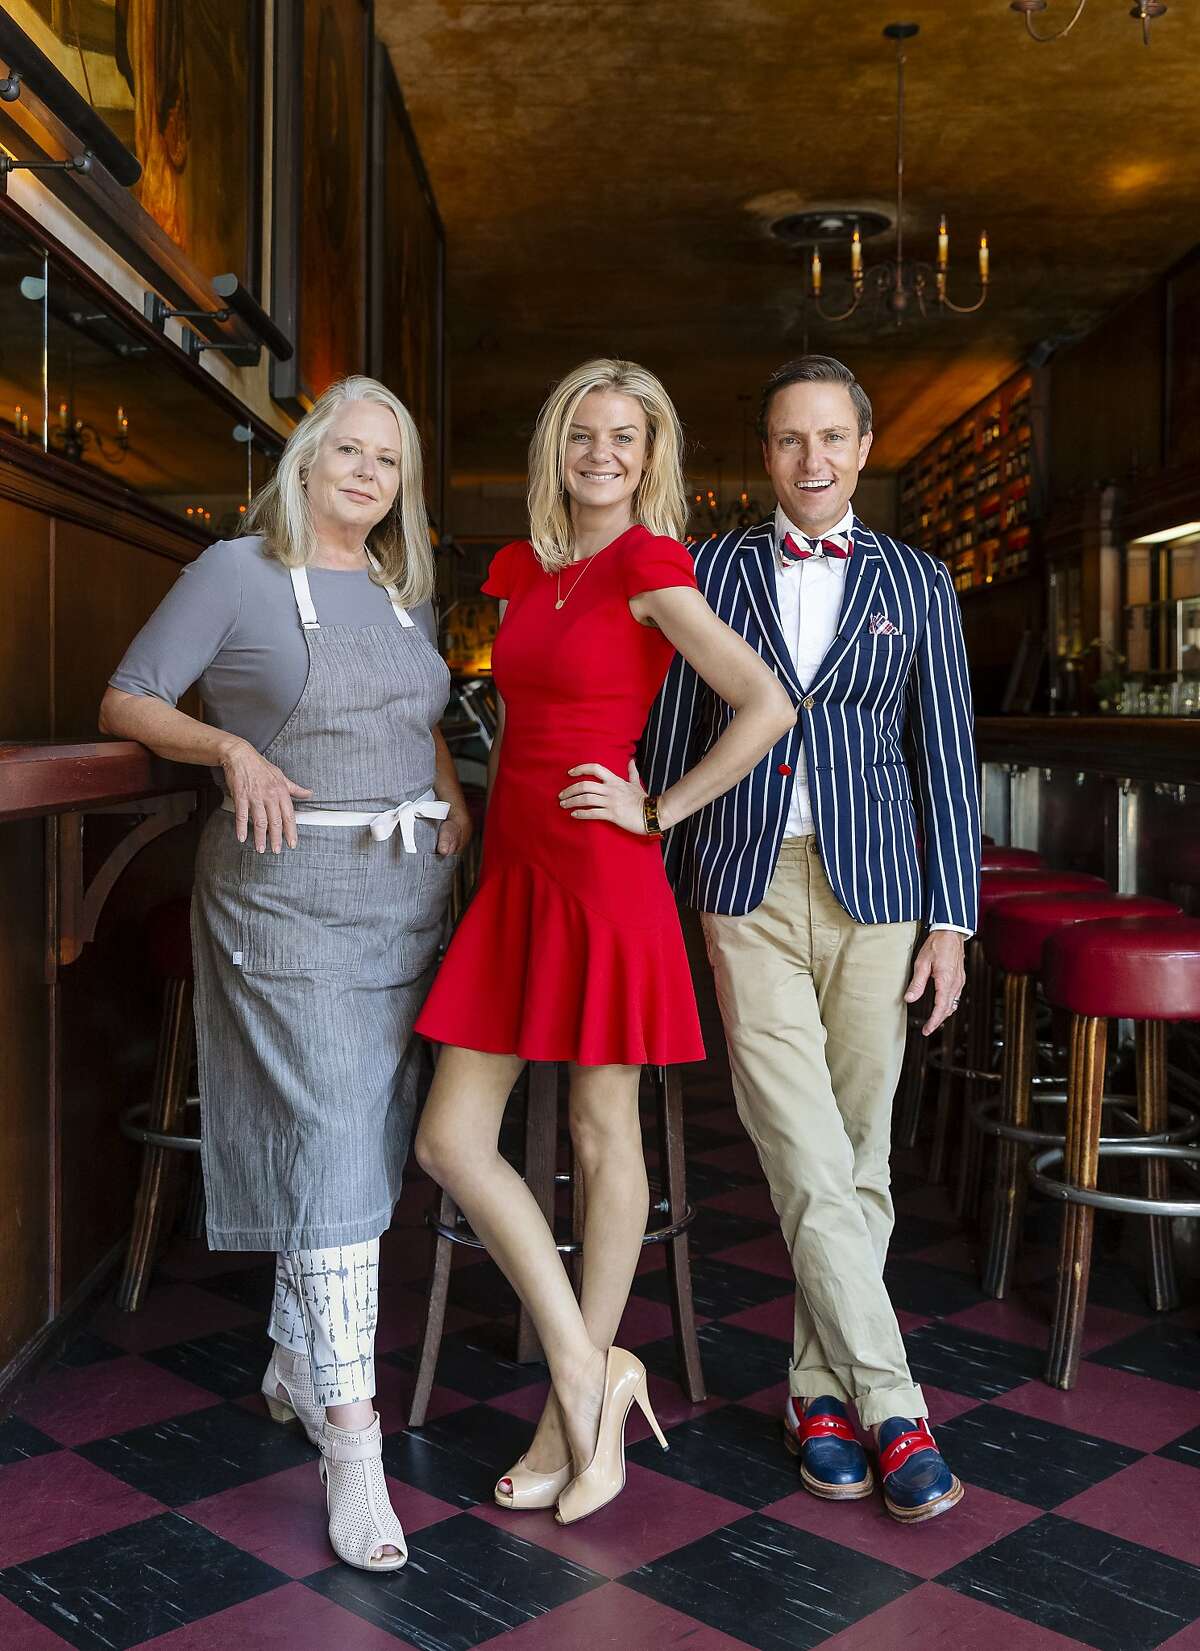 Tosca's new owners (from left to right): Nancy Oakes, Anna Weinberg, Ken Fulk